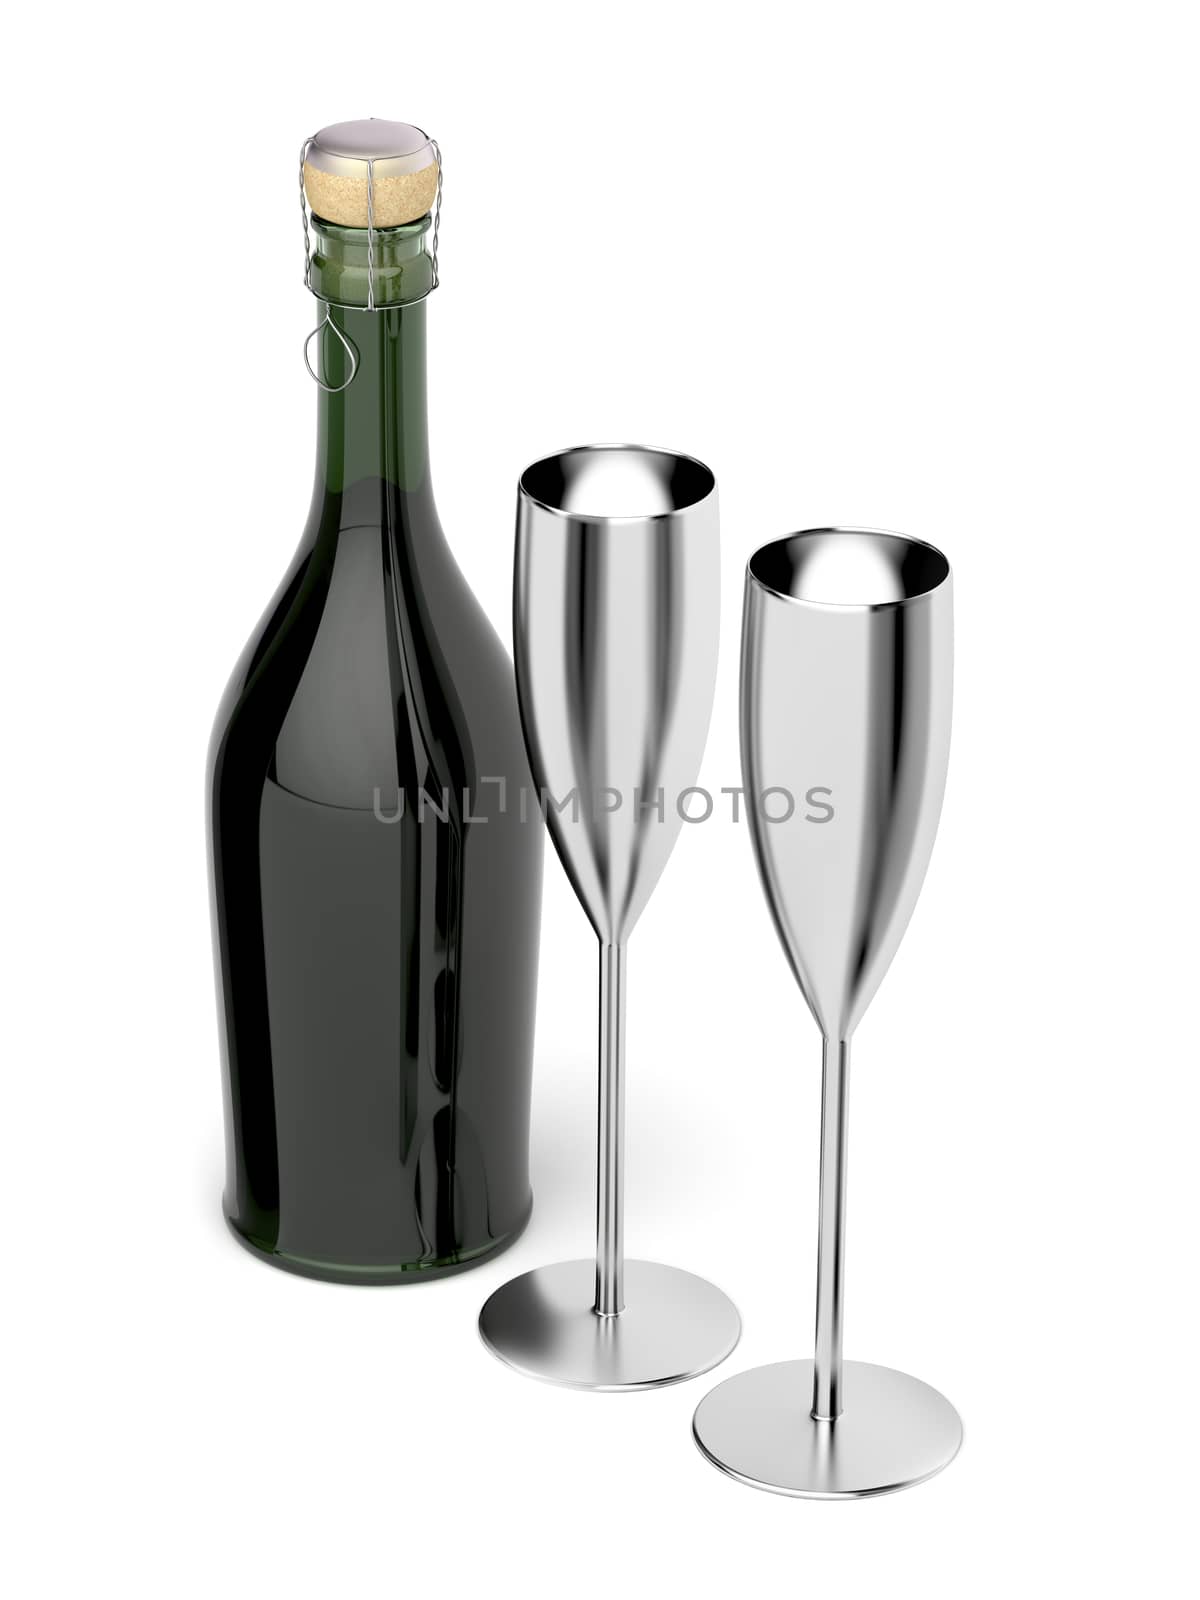 Pair of champagne flutes and bottle by magraphics